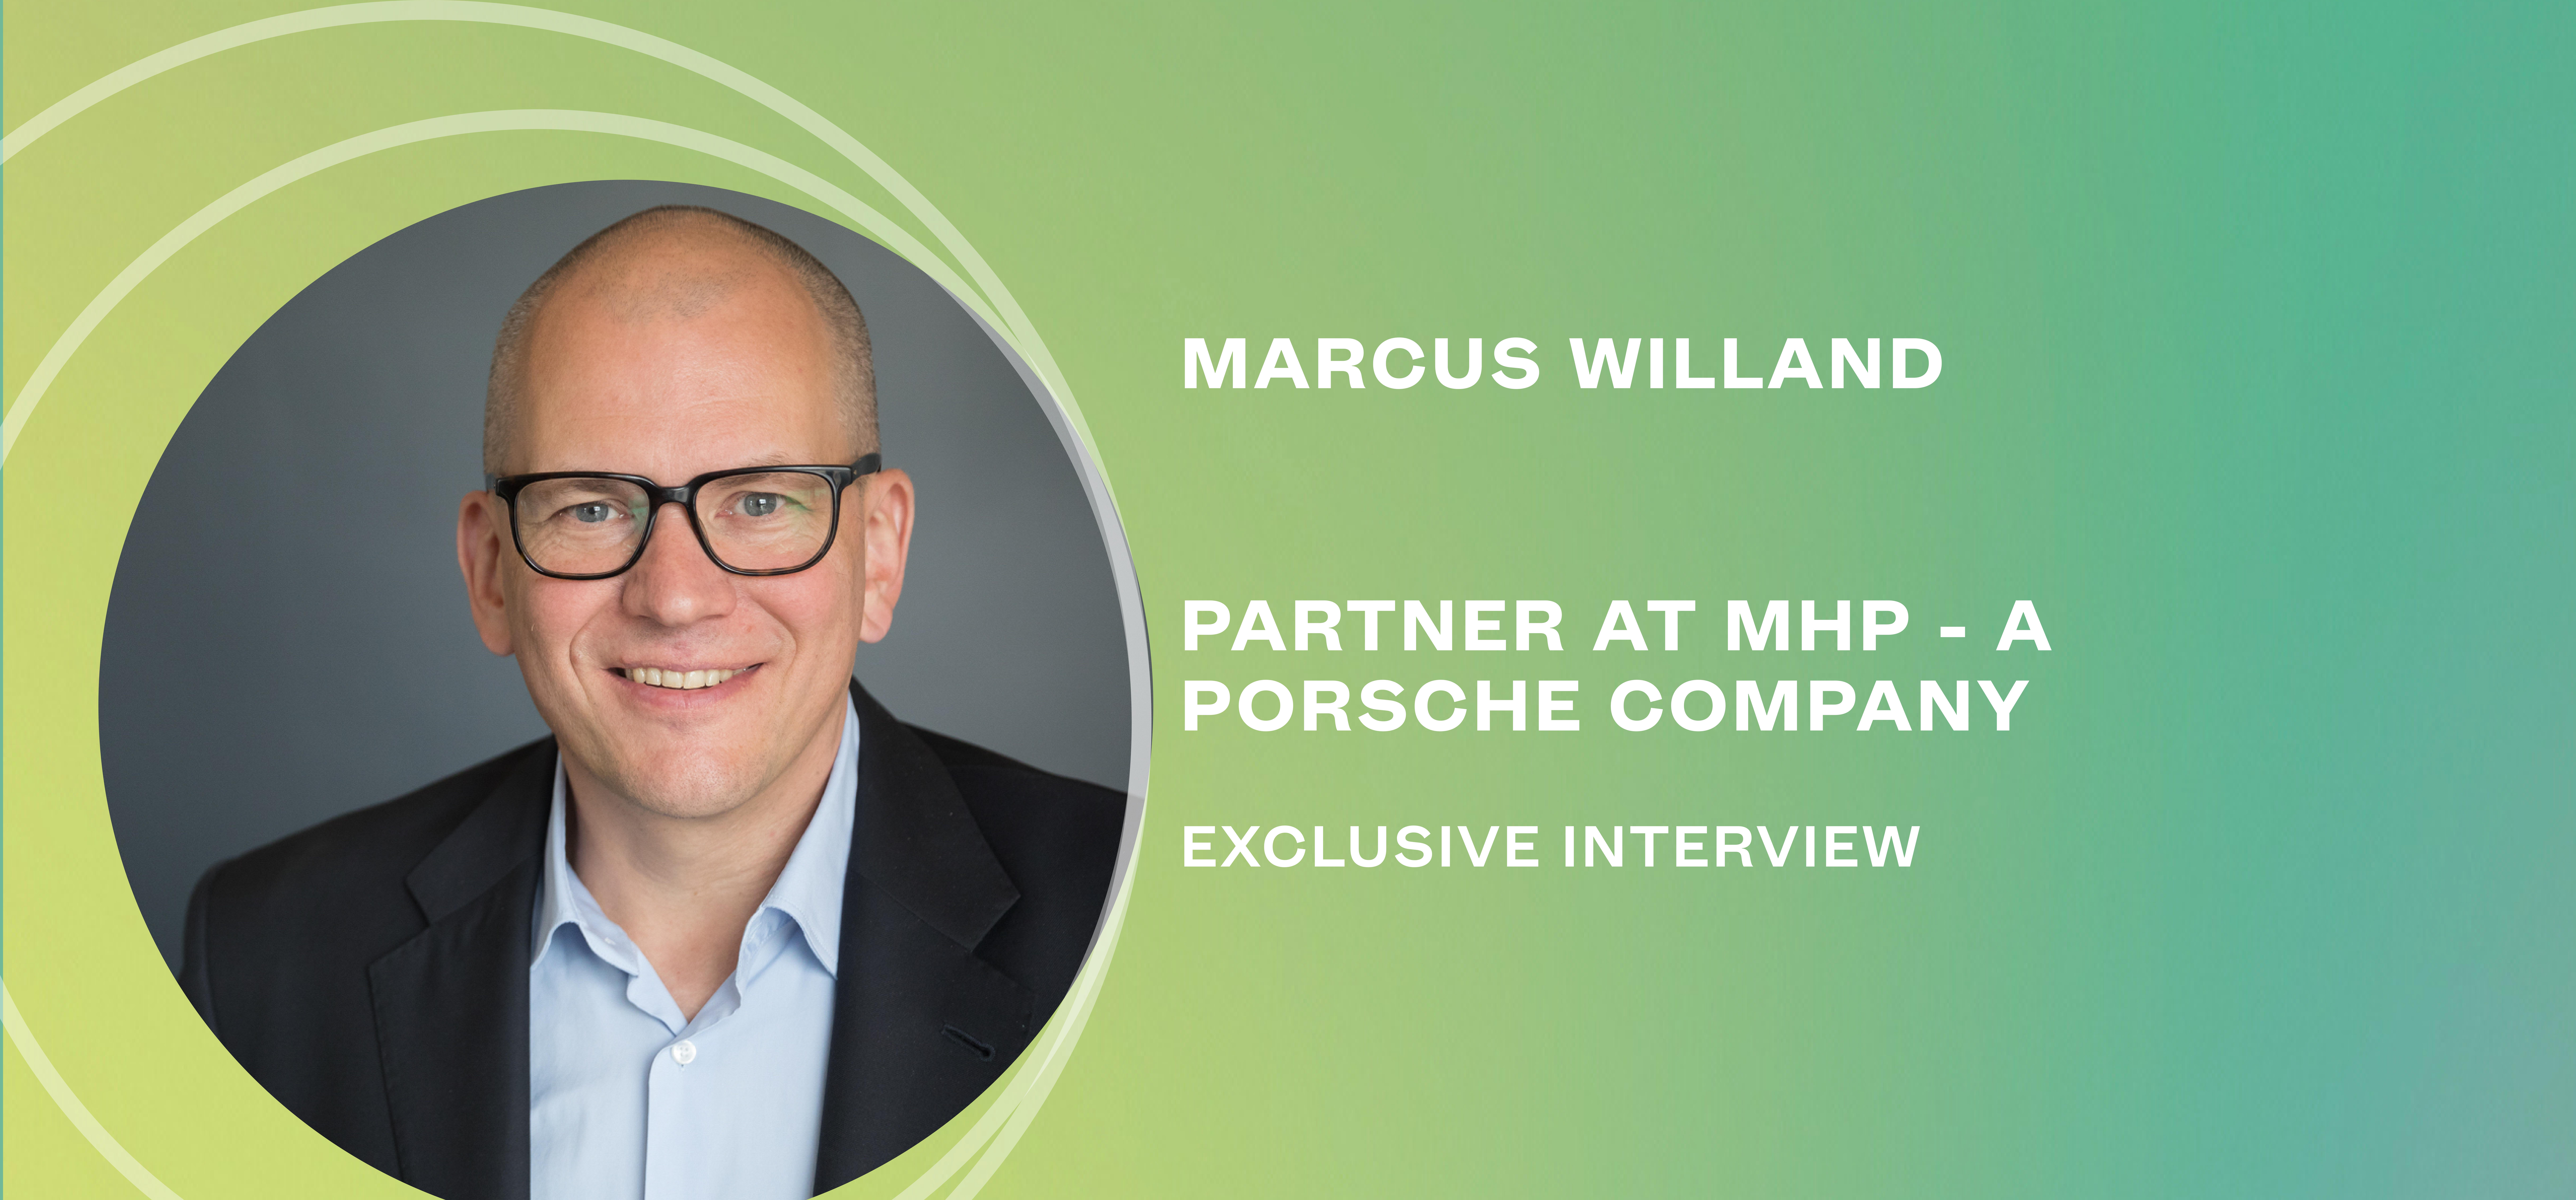 Driving Success in the Changing Automotive Industry: Interview with Marcus Willand, Partner at MHP - A Porsche Company